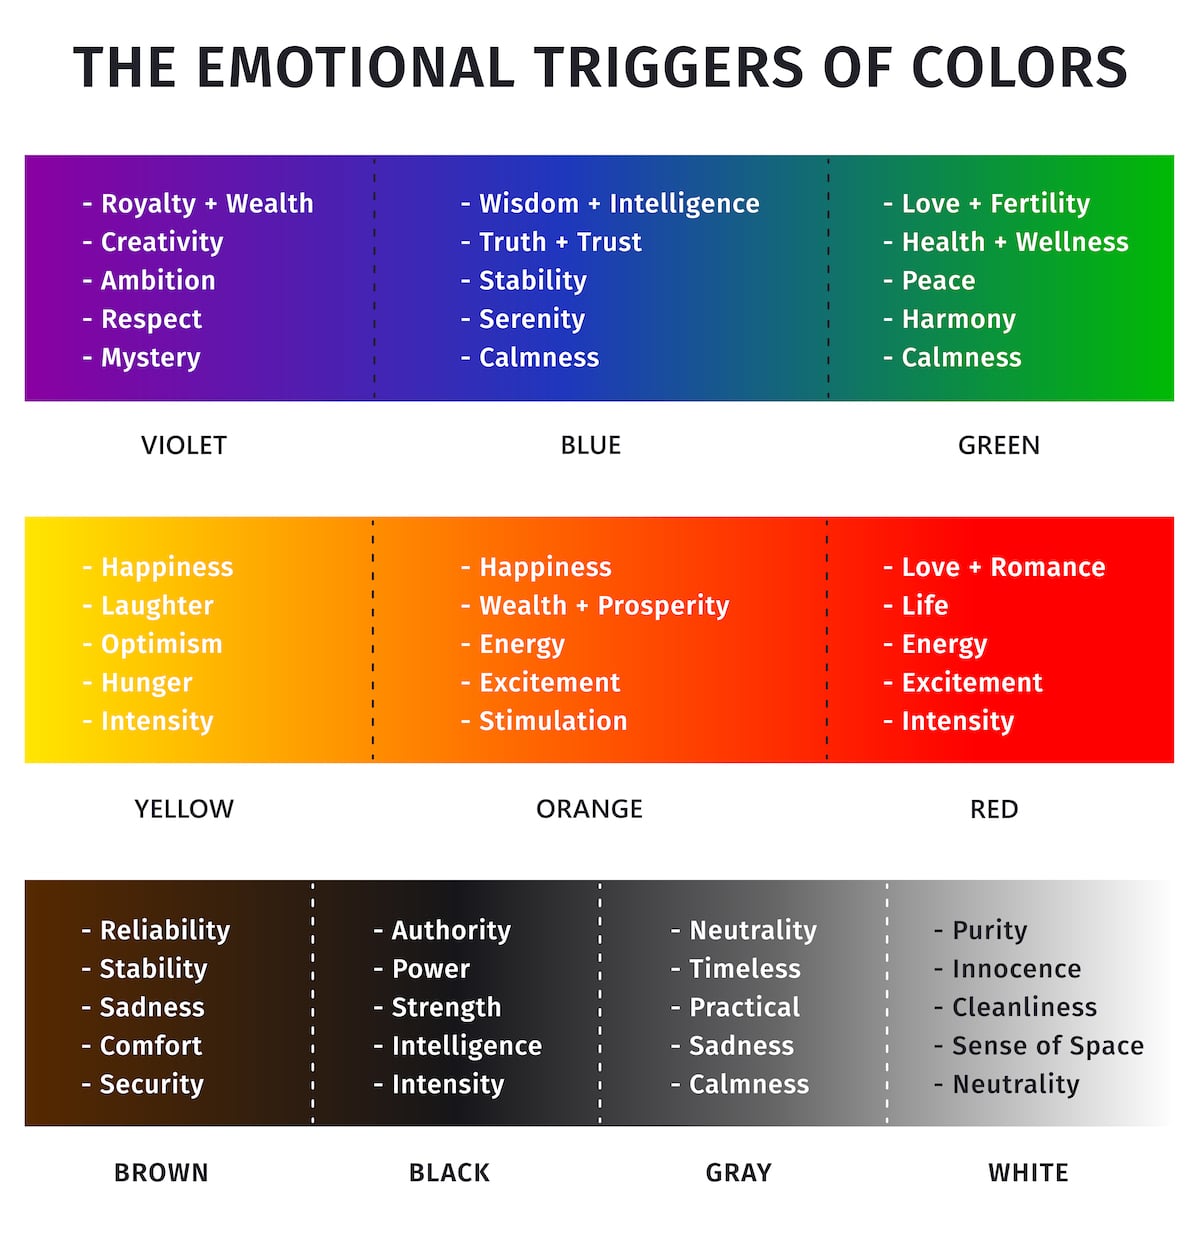 the emotional triggers of colors chart - how colors affect your emotions